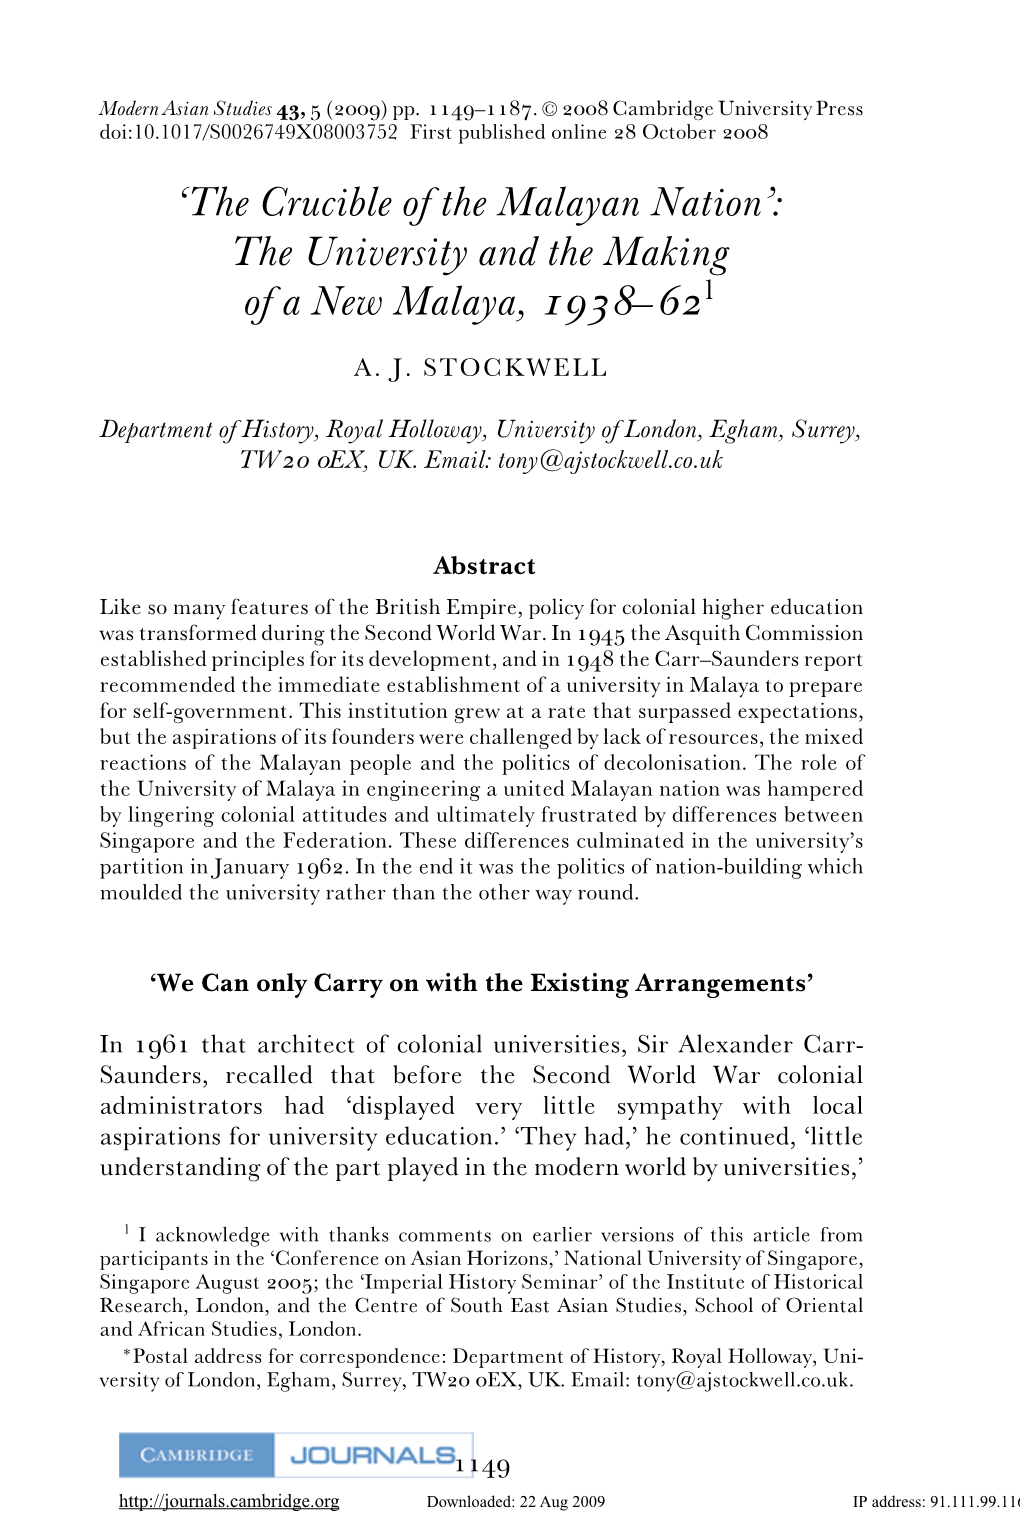 'The Crucible of the Malayan Nation': the University and the Making of a New Malaya, 1938–62